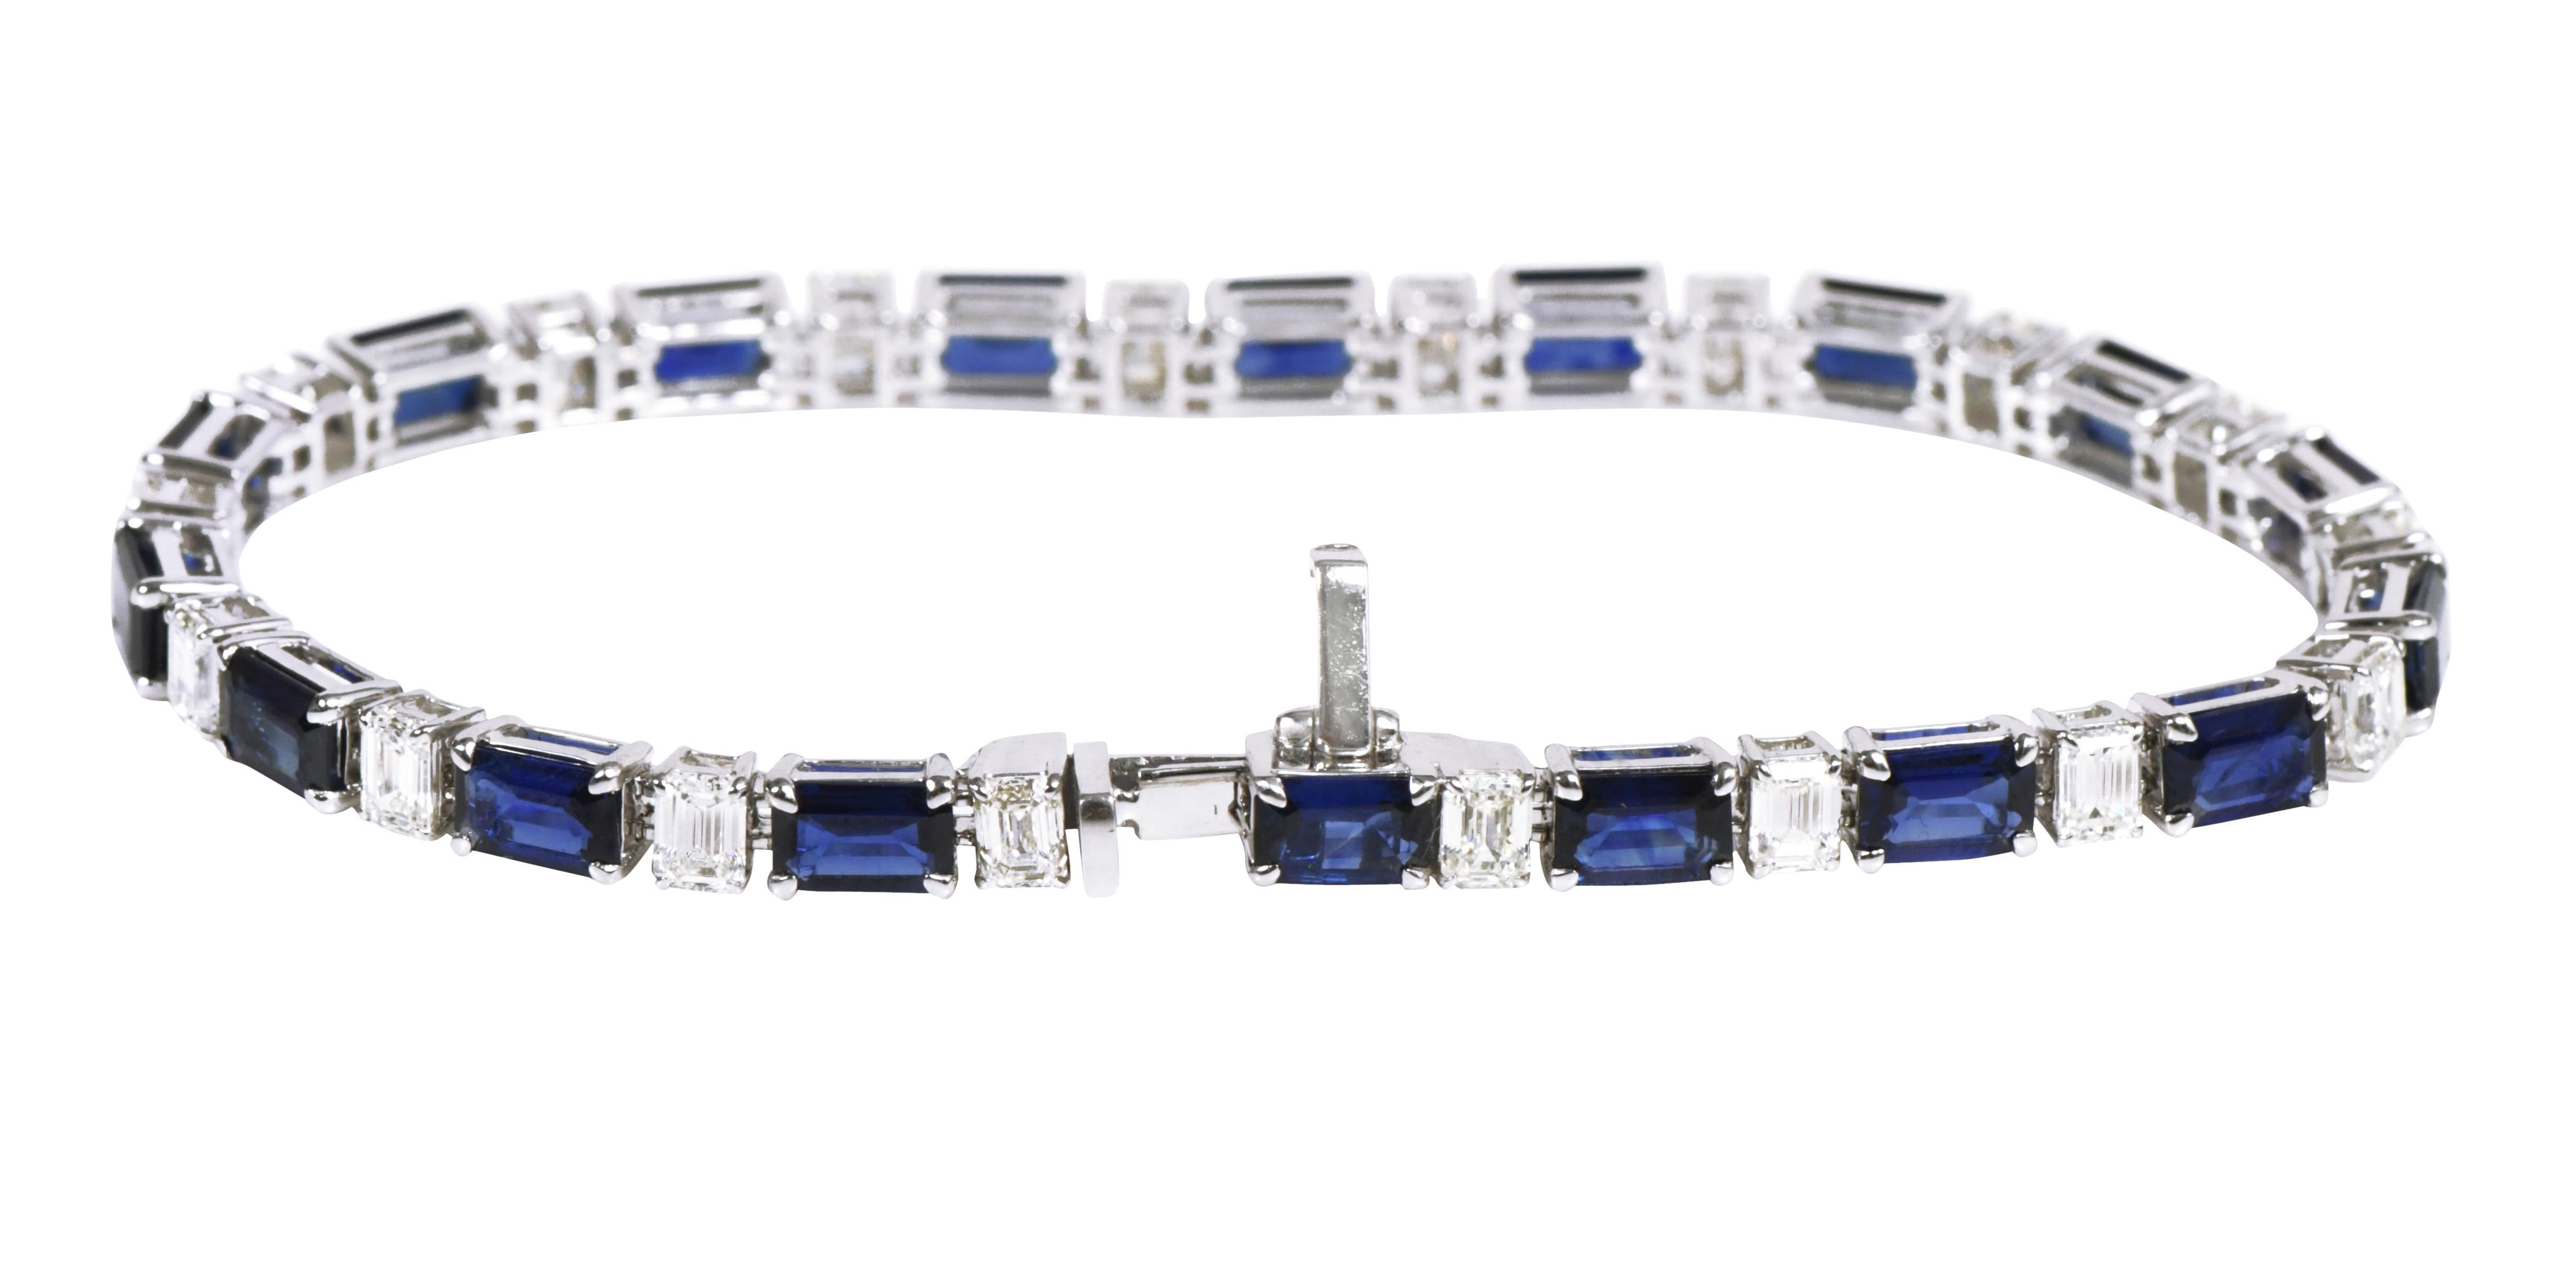 18 Karat White Gold 14.79 Carat Sapphire and Diamond Solitaire Tennis Bracelet

Tessellating diamond solitaires, and sapphires make this bracelet a true showstopper. This stunning design is handcrafted in emerald-cut sapphires that are perfectly